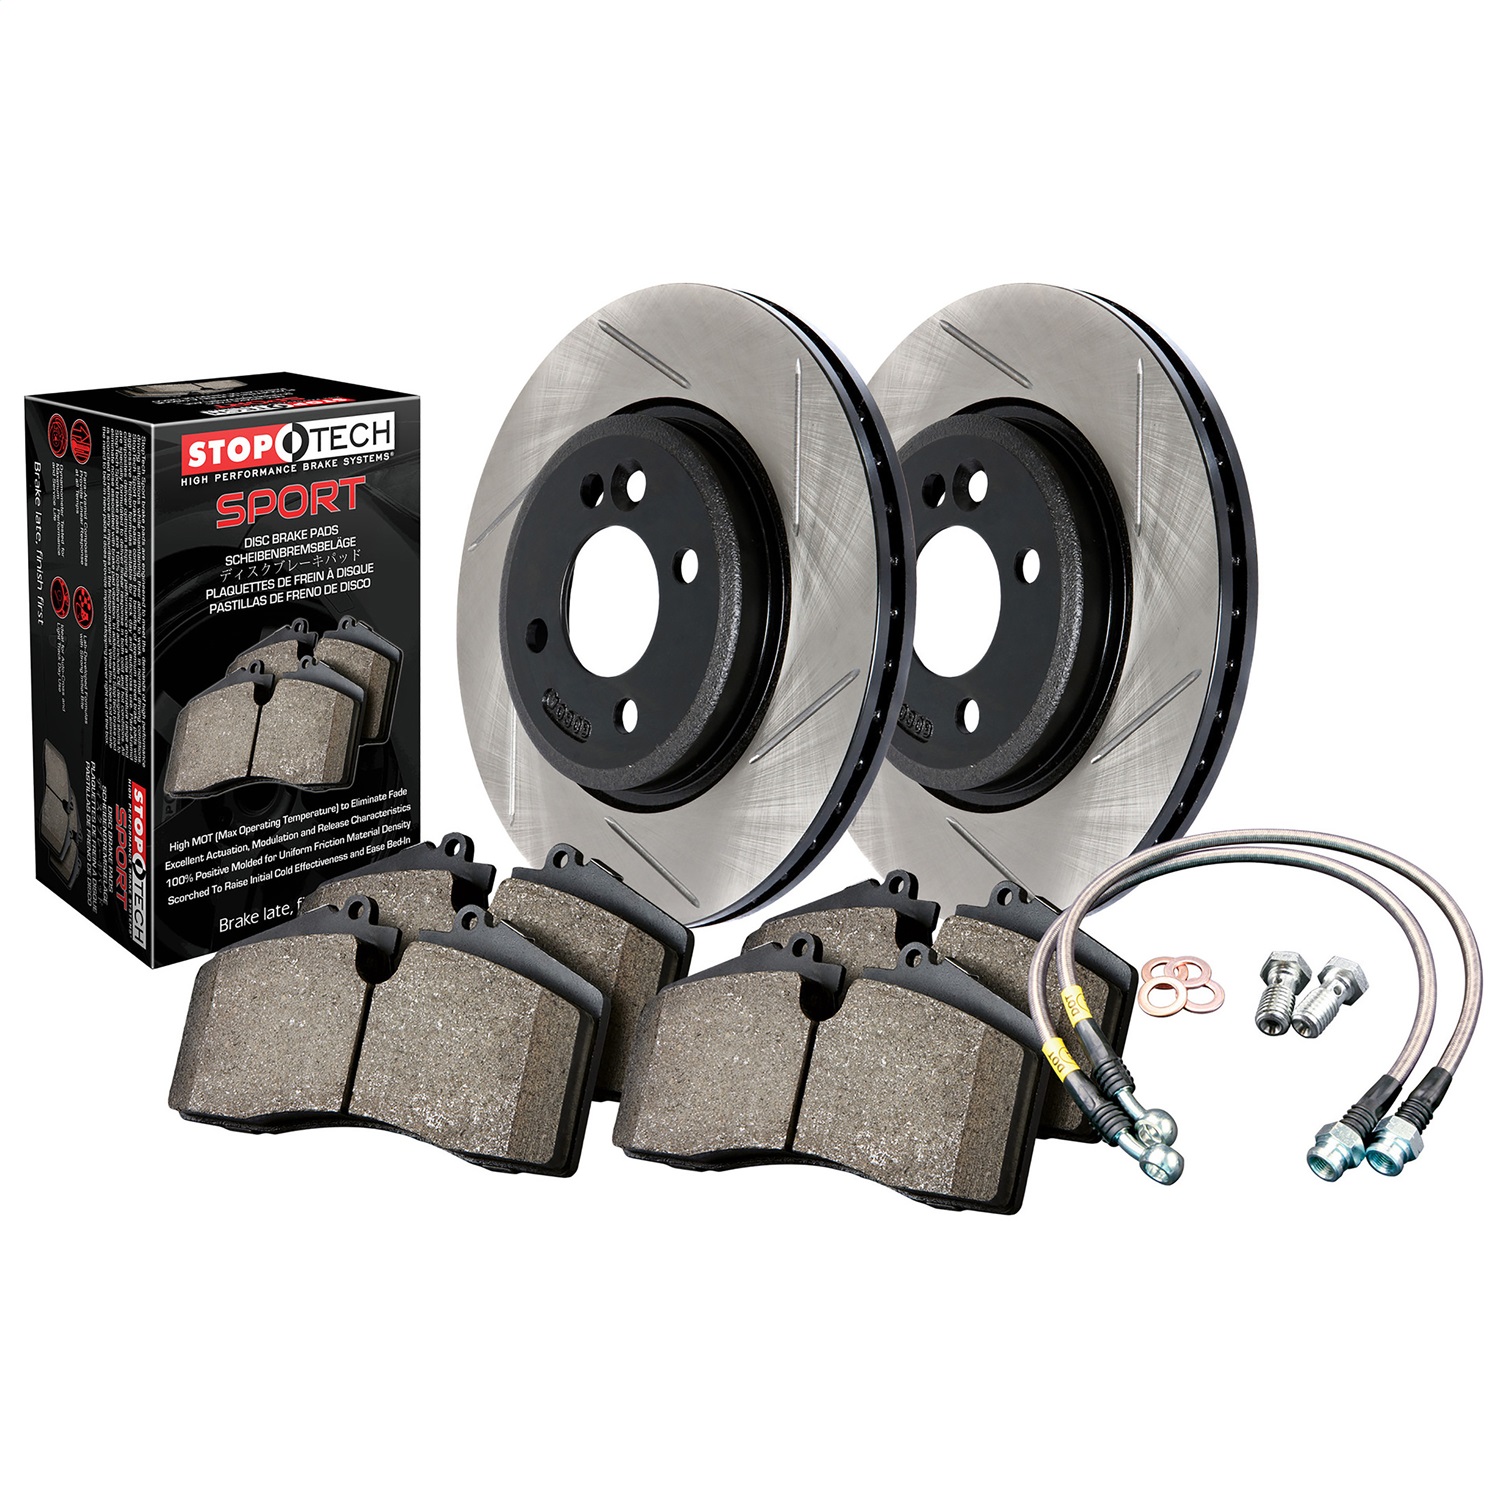 StopTech 977.42009R Sport Disc Brake Kit w/Slotted Rotors